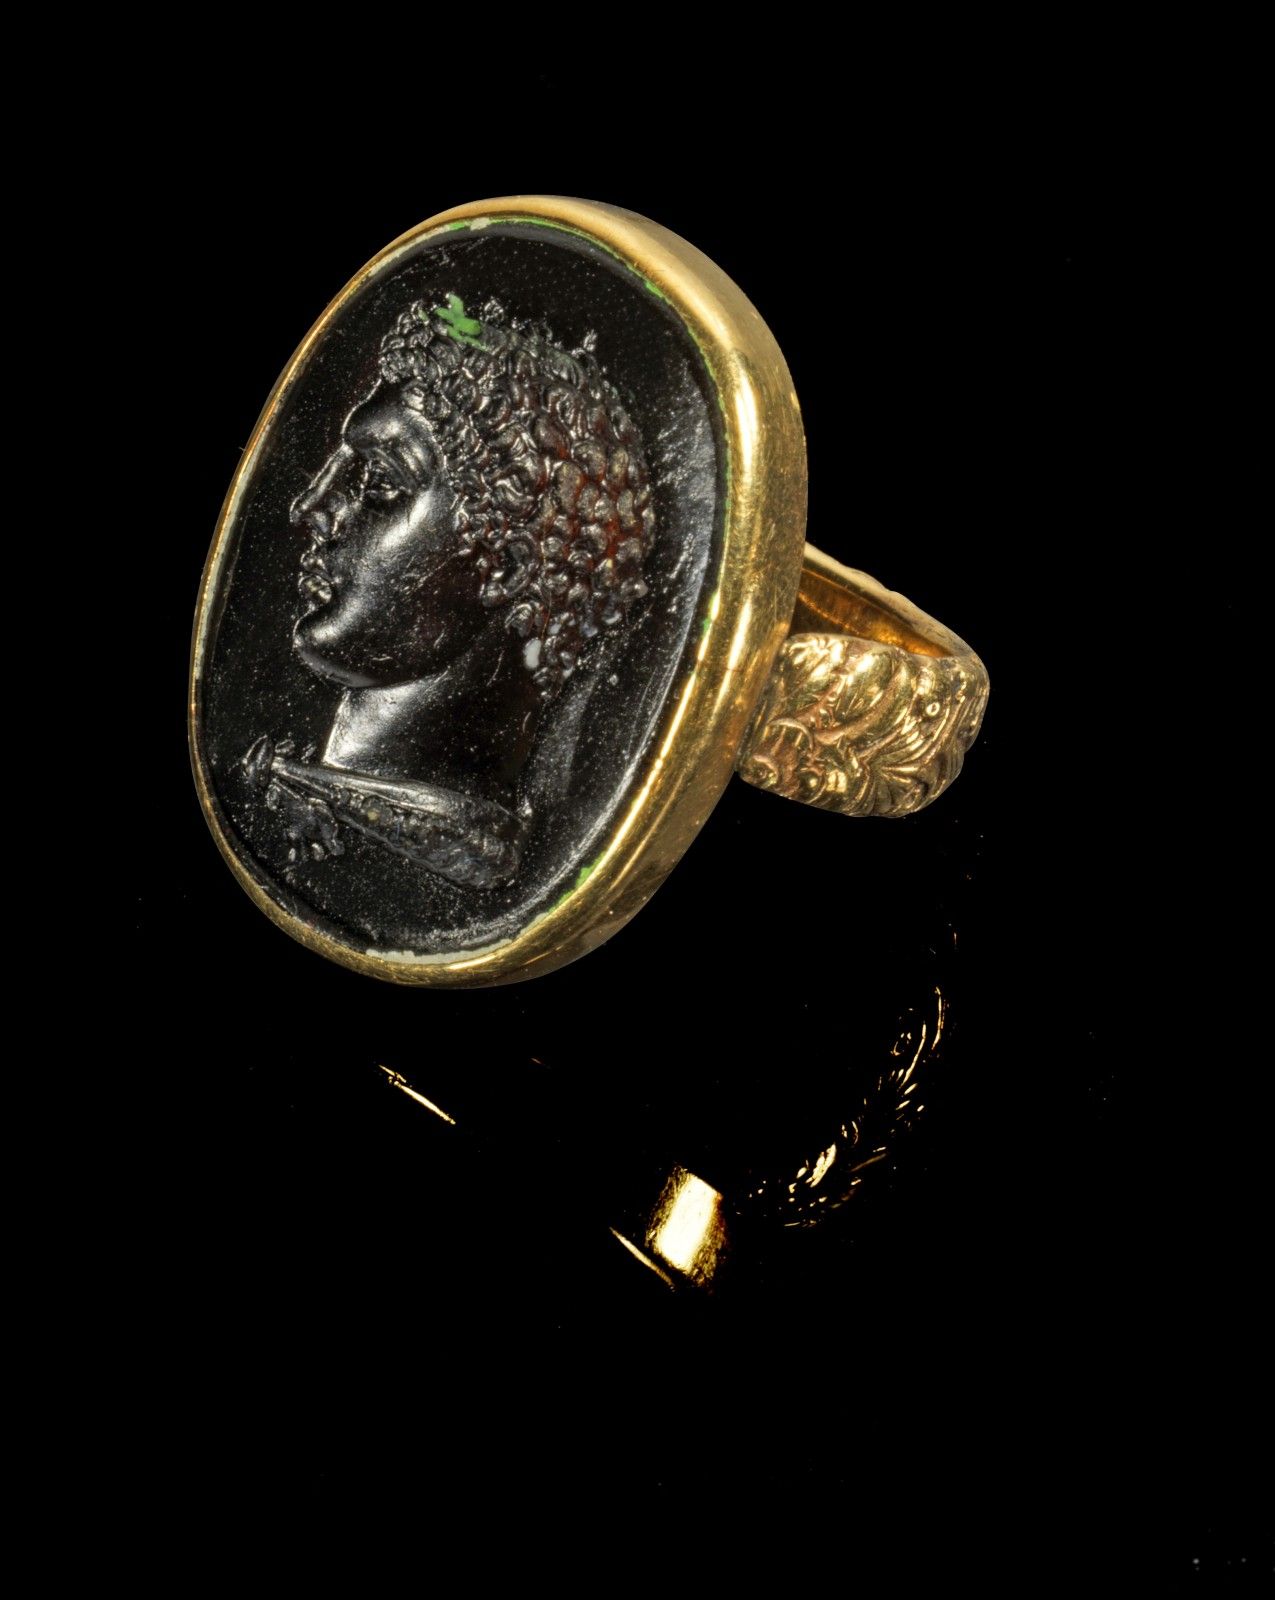 Goldring mit Intaglio. Golden ring with intaglio made of black glass depicting y&hellip;